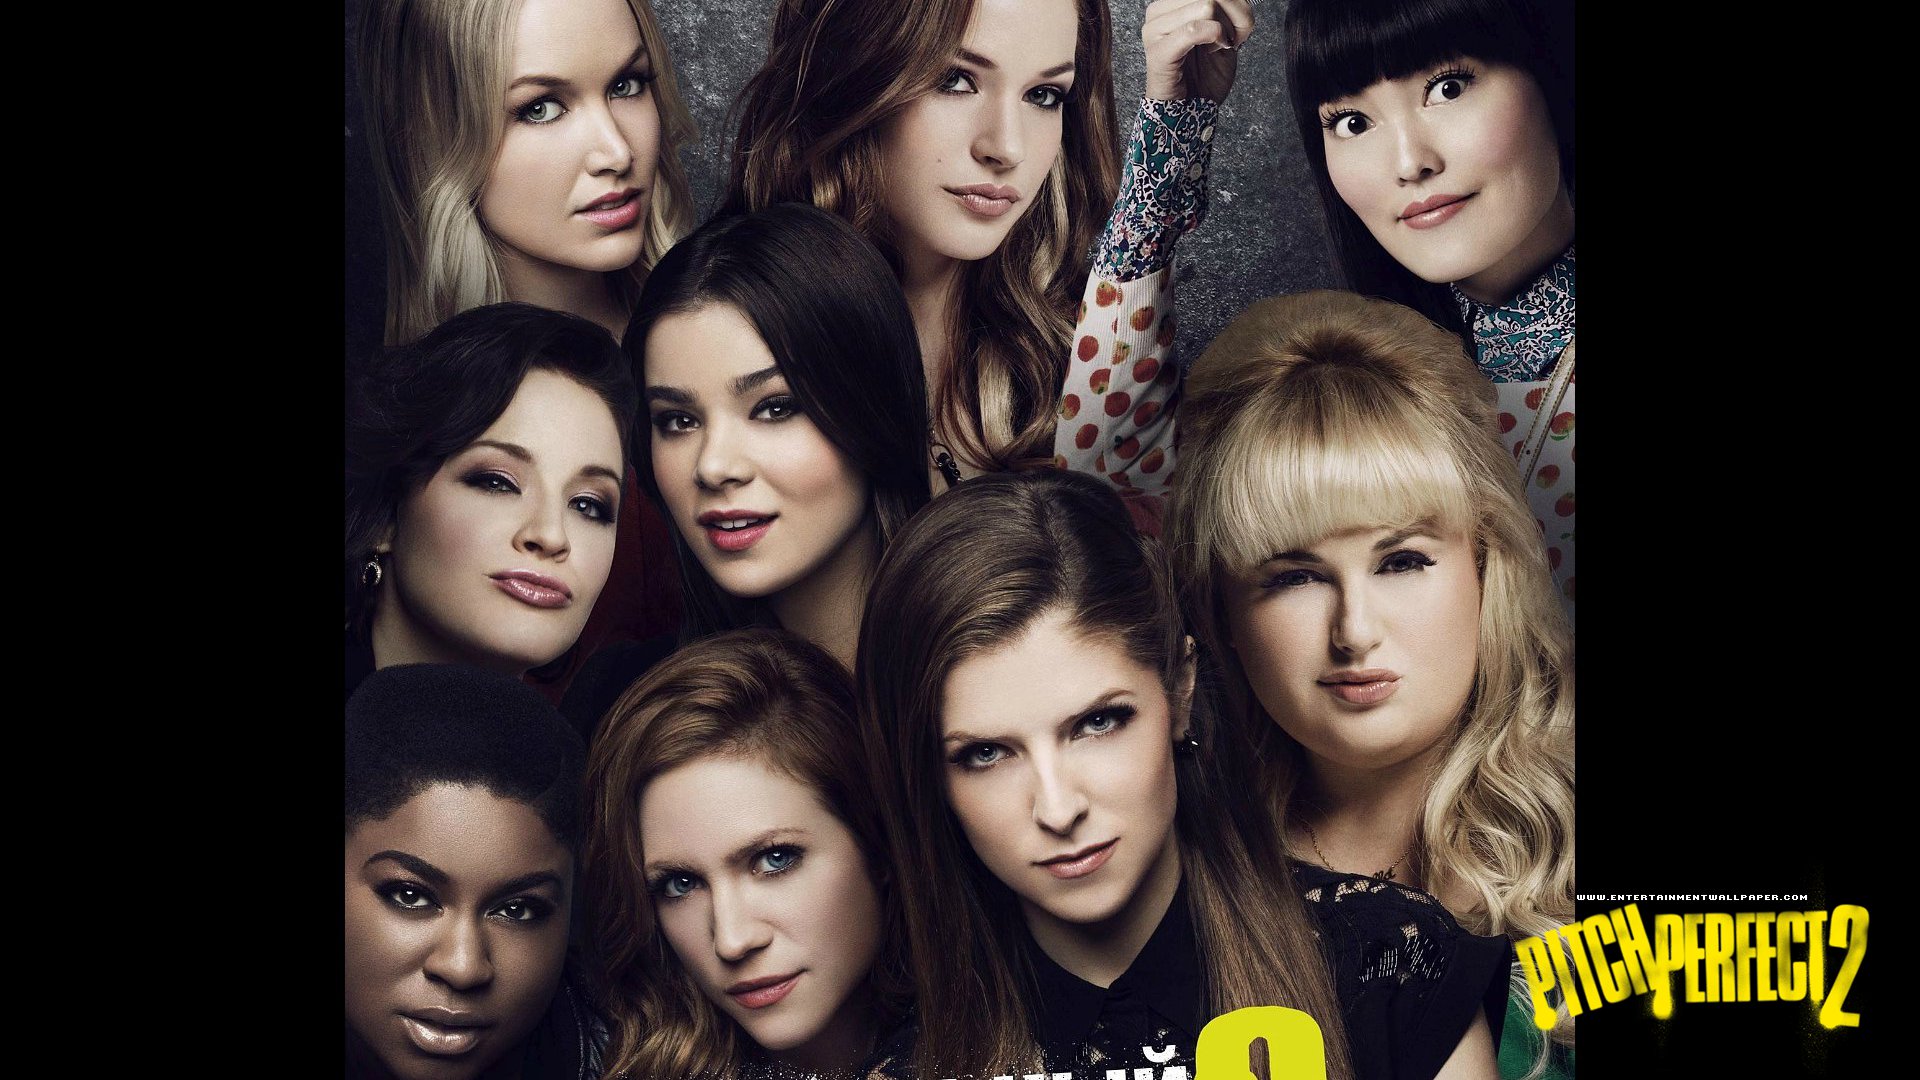  pitch perfect 2 wallpaper 10045854 size 1920x1080 more pitch perfect 2